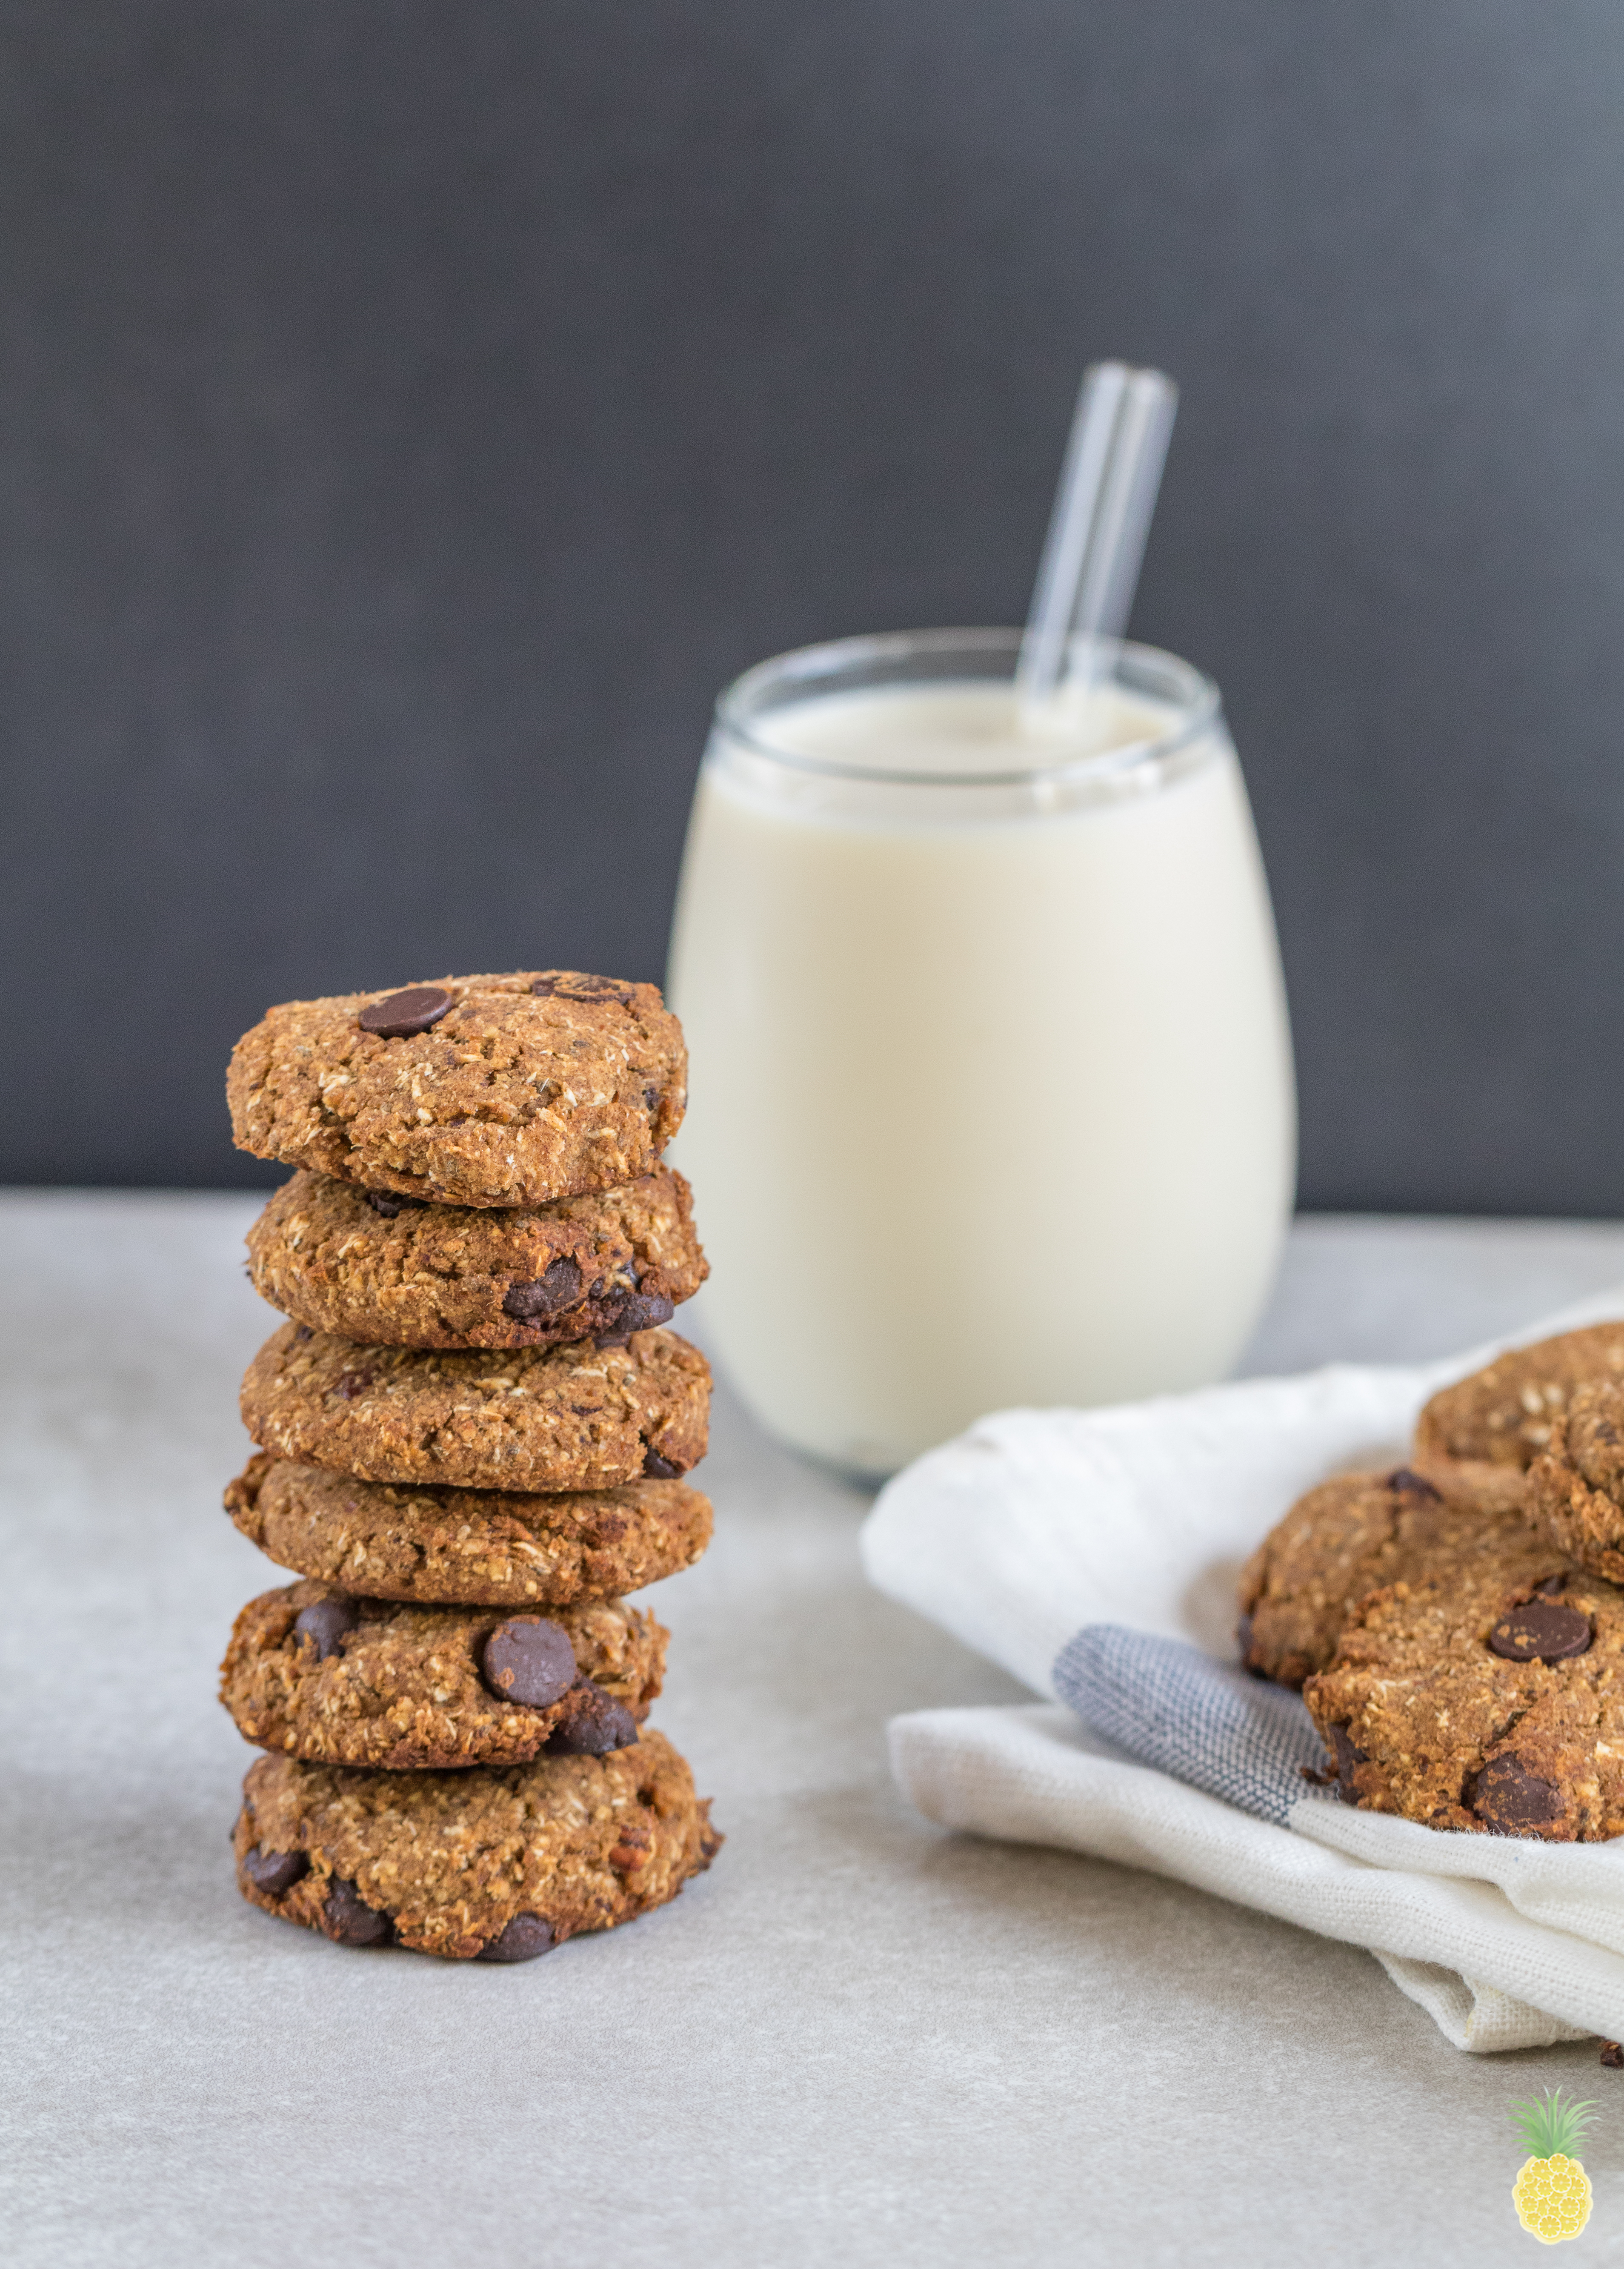 A stack of vegan chickpea cookies in front of a glass of milk and a blue towel on sweetsimplevegan.com